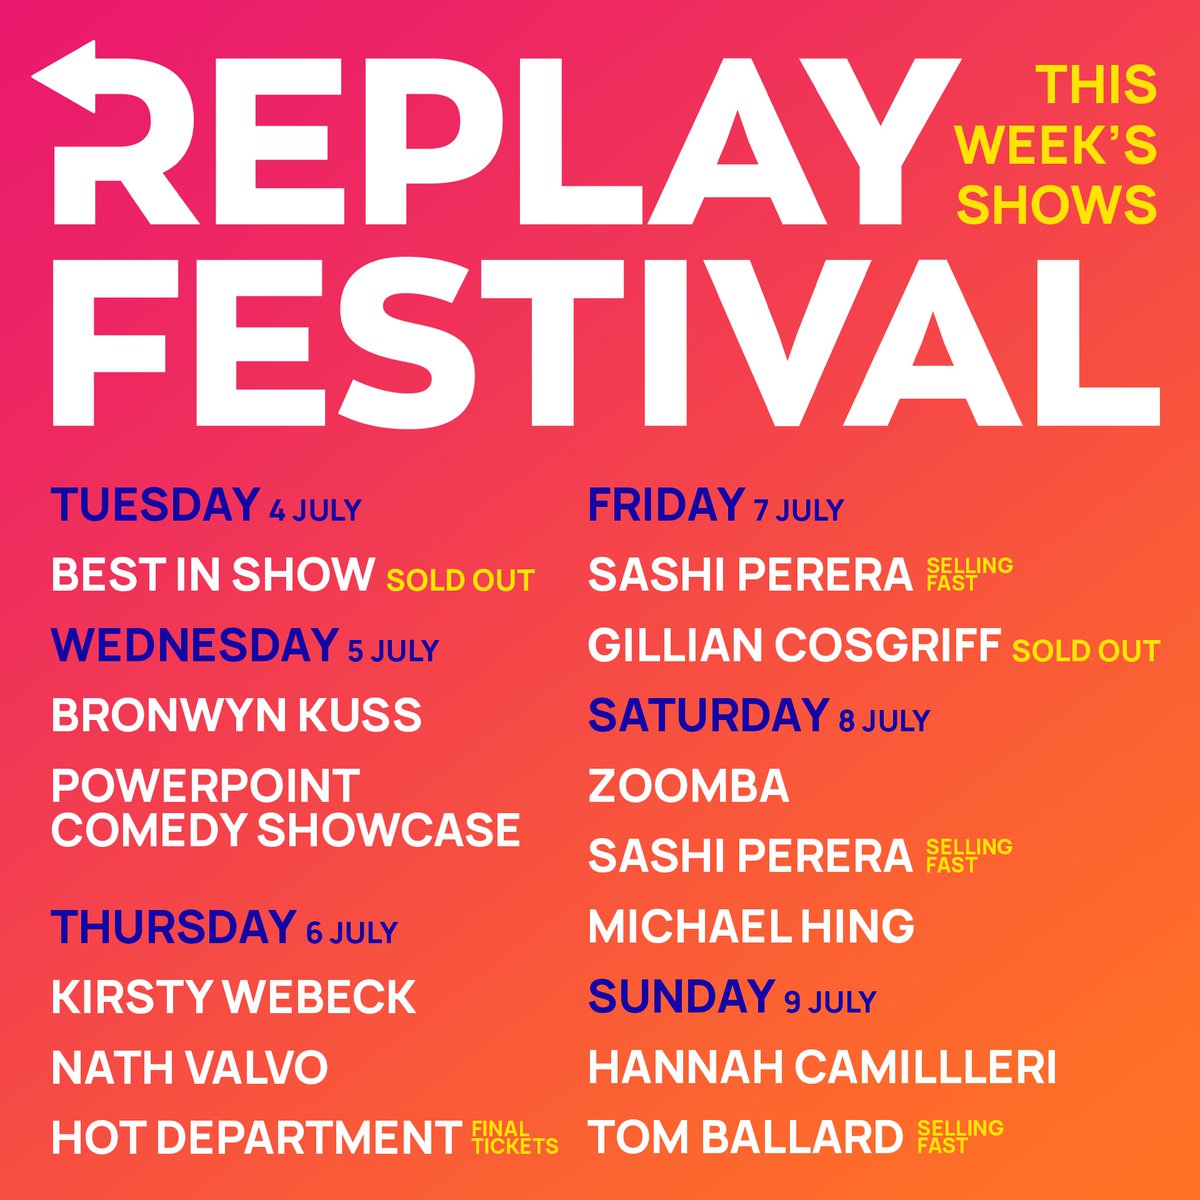 Replay Festival starts this week! Featuring @nathvalvo @KirstyWebeck @hingers @TomCBallard @BronwynKuss @hotdepartment and heaps more 🤩 Check the full program and book tickets now at comedyrepublic.com.au